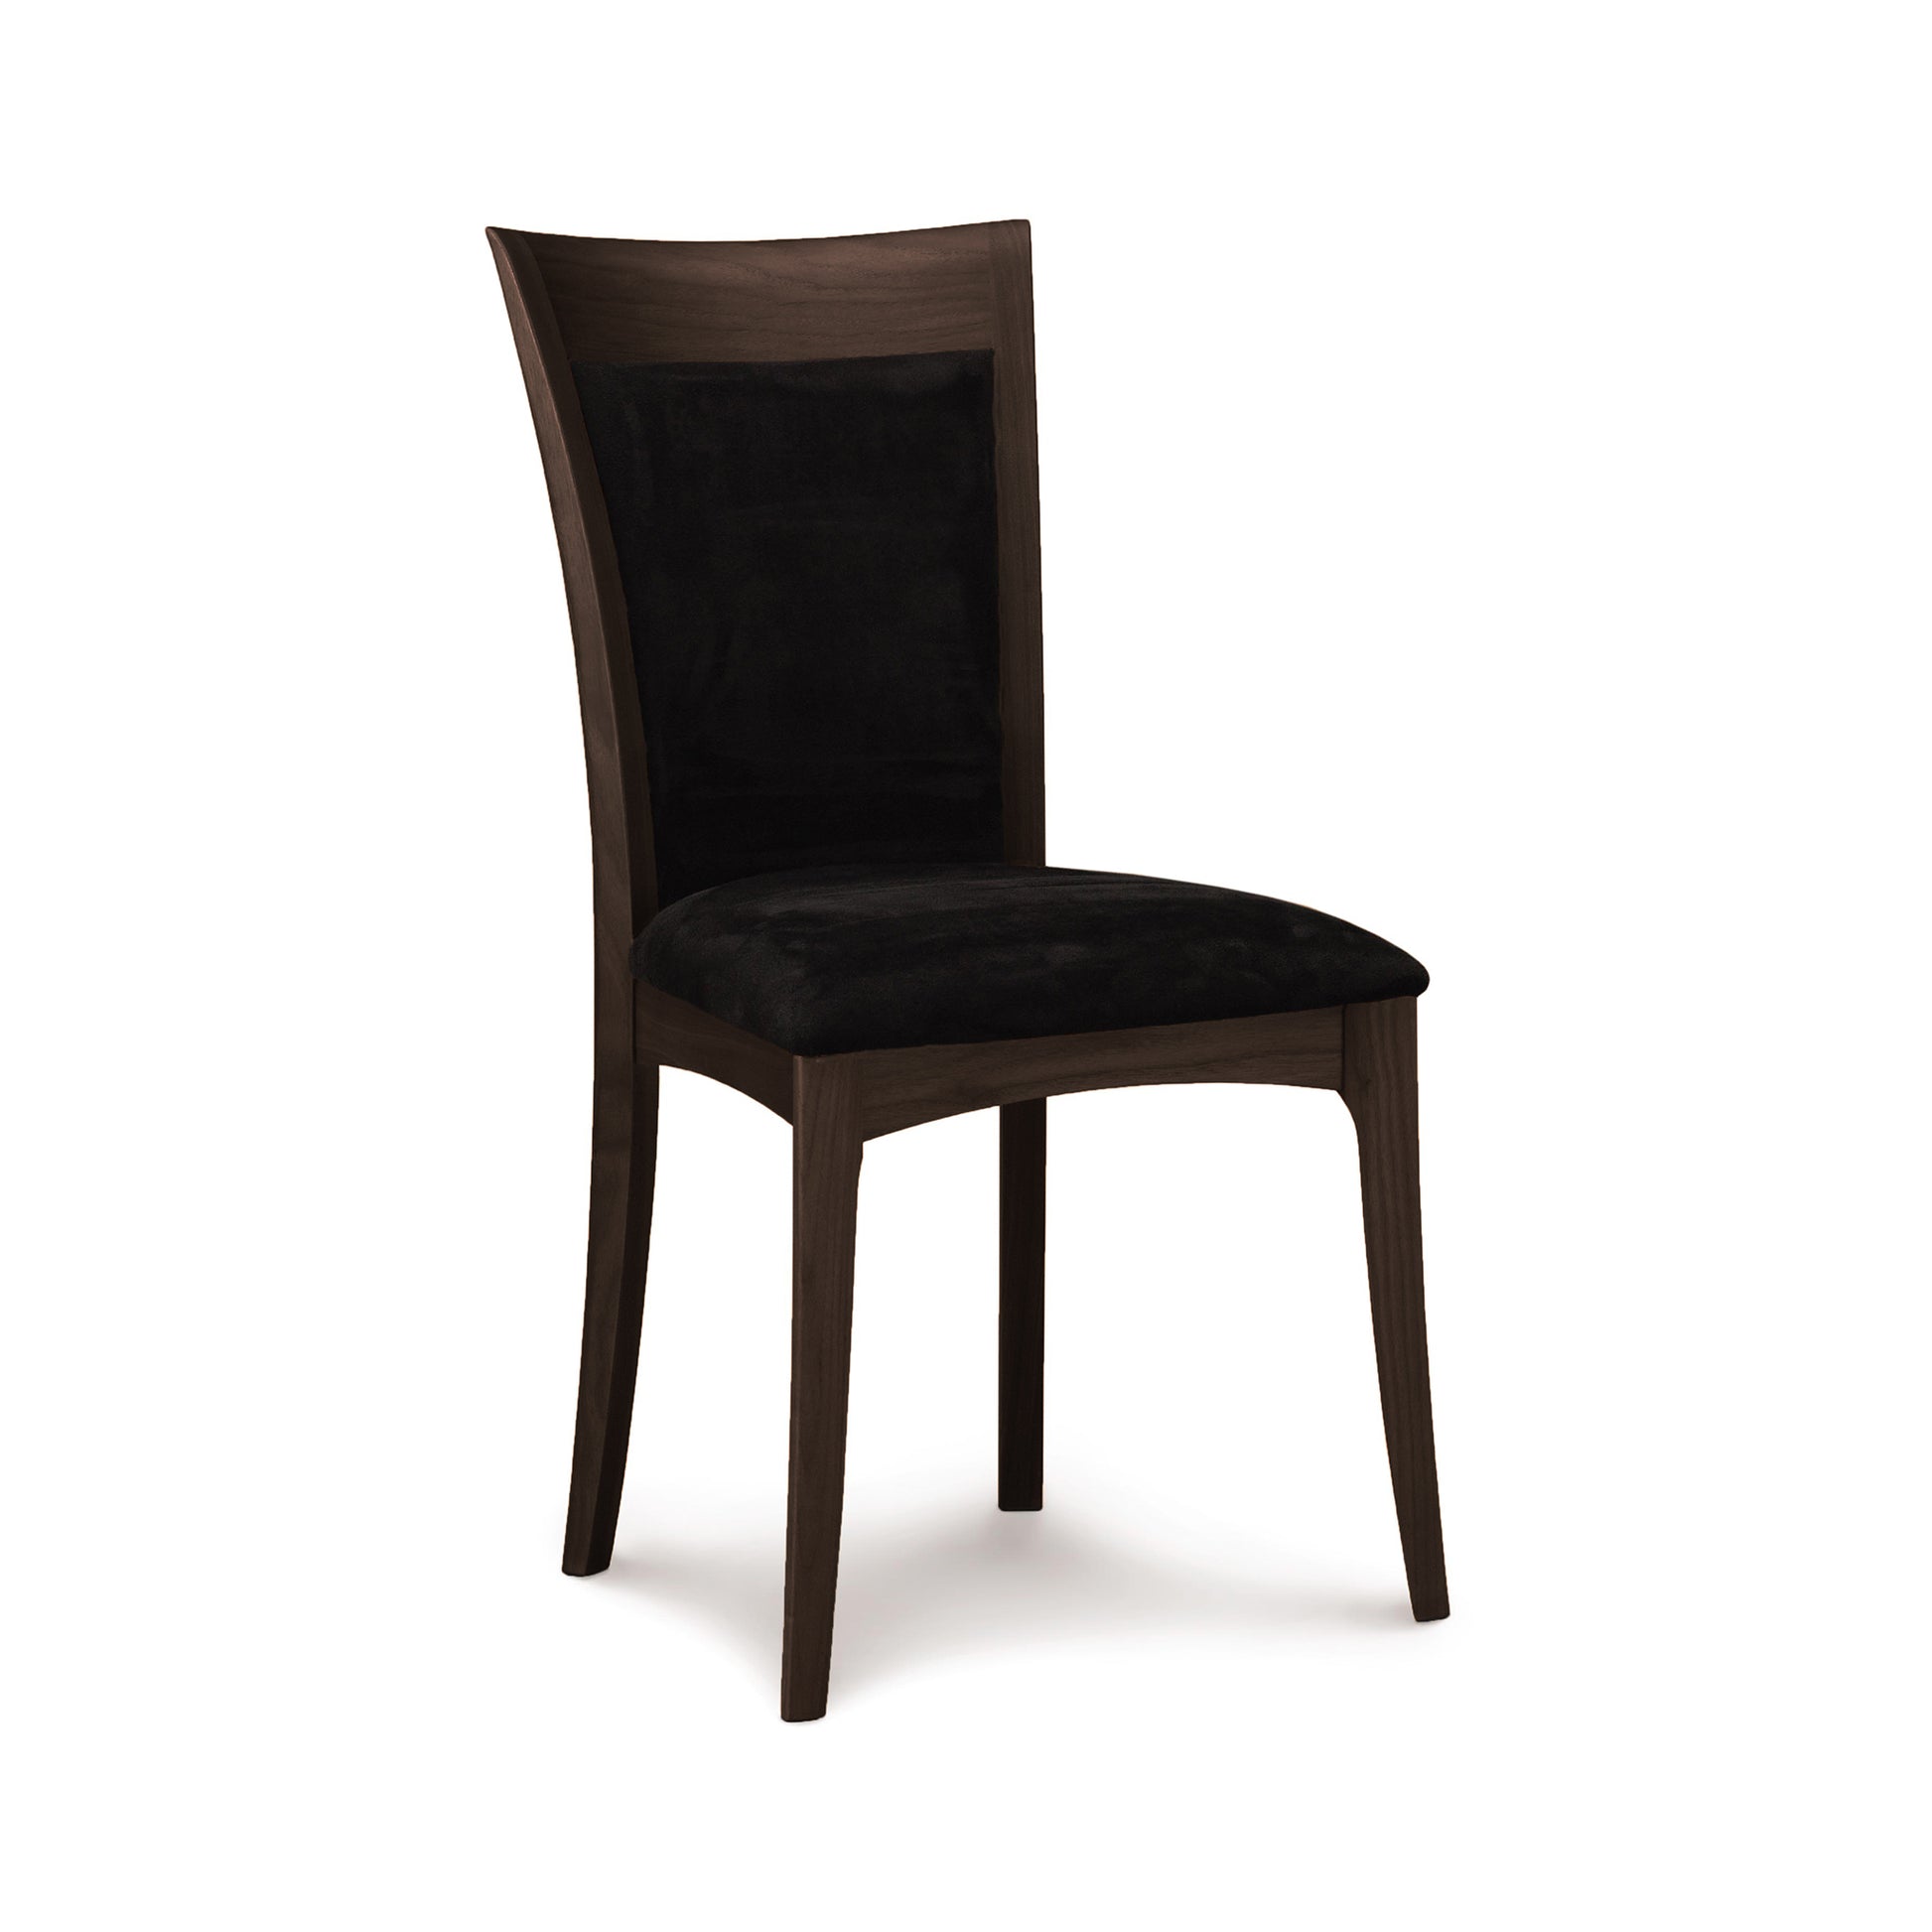 A modern Morgan Shaker Chair by Copeland Furniture with a dark finish and black upholstered seat.